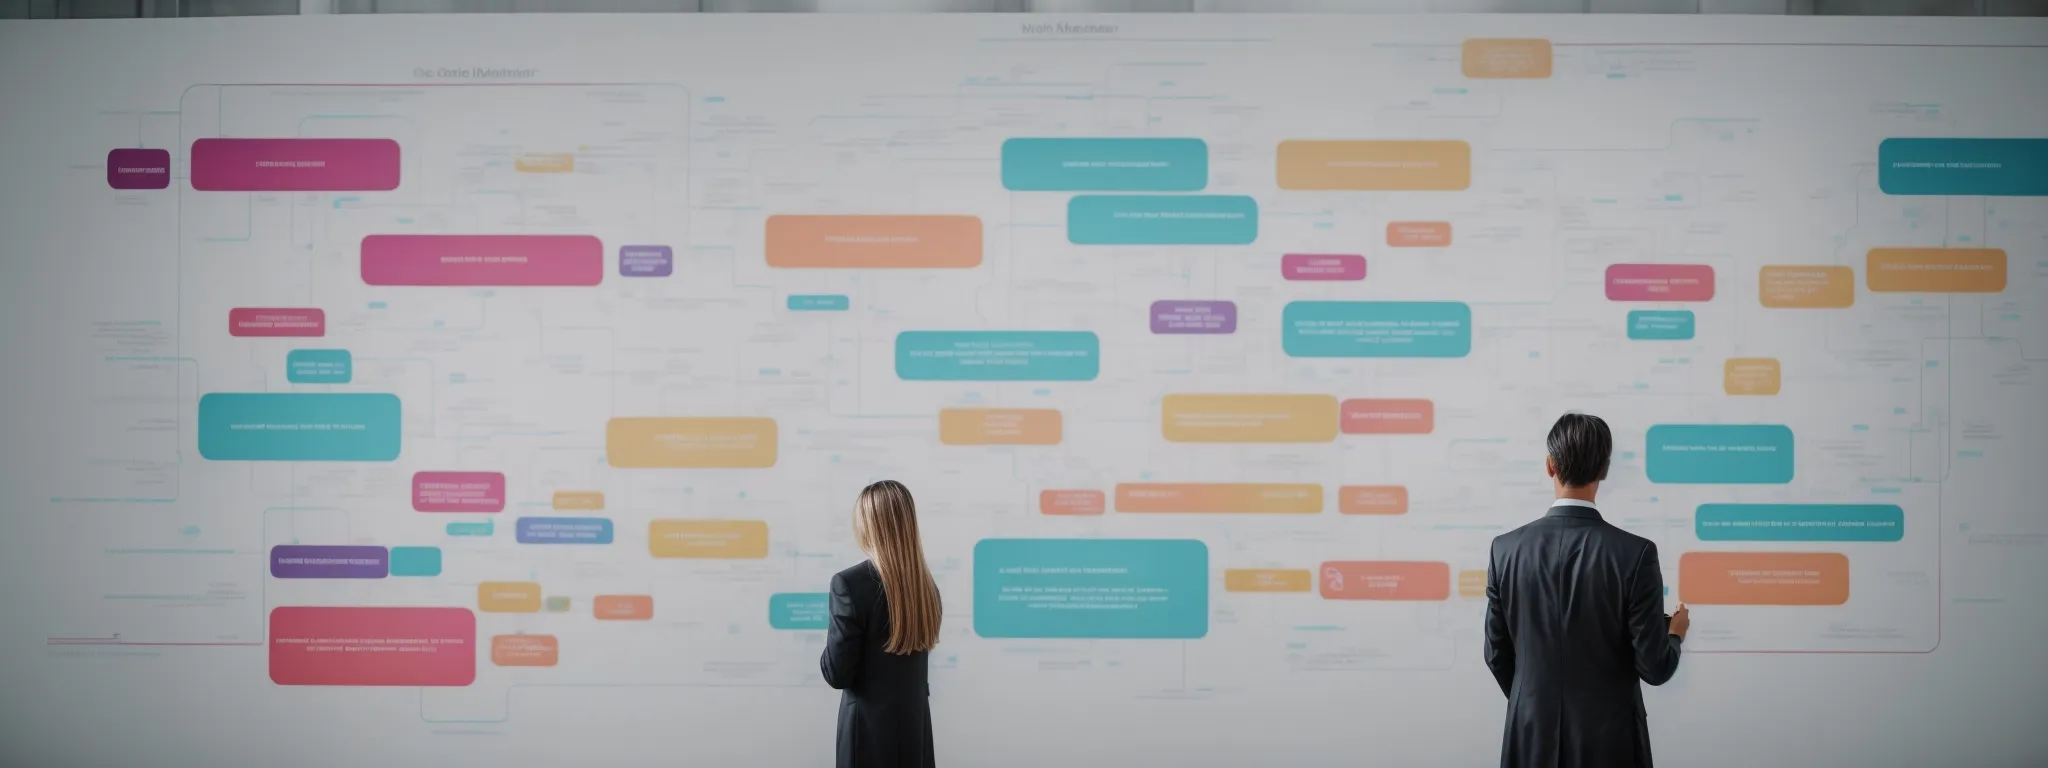 a digital marketer stands before a large touchscreen displaying a colorful flowchart that represents the different stages of the customer journey, with keyword clusters strategically placed along the path.